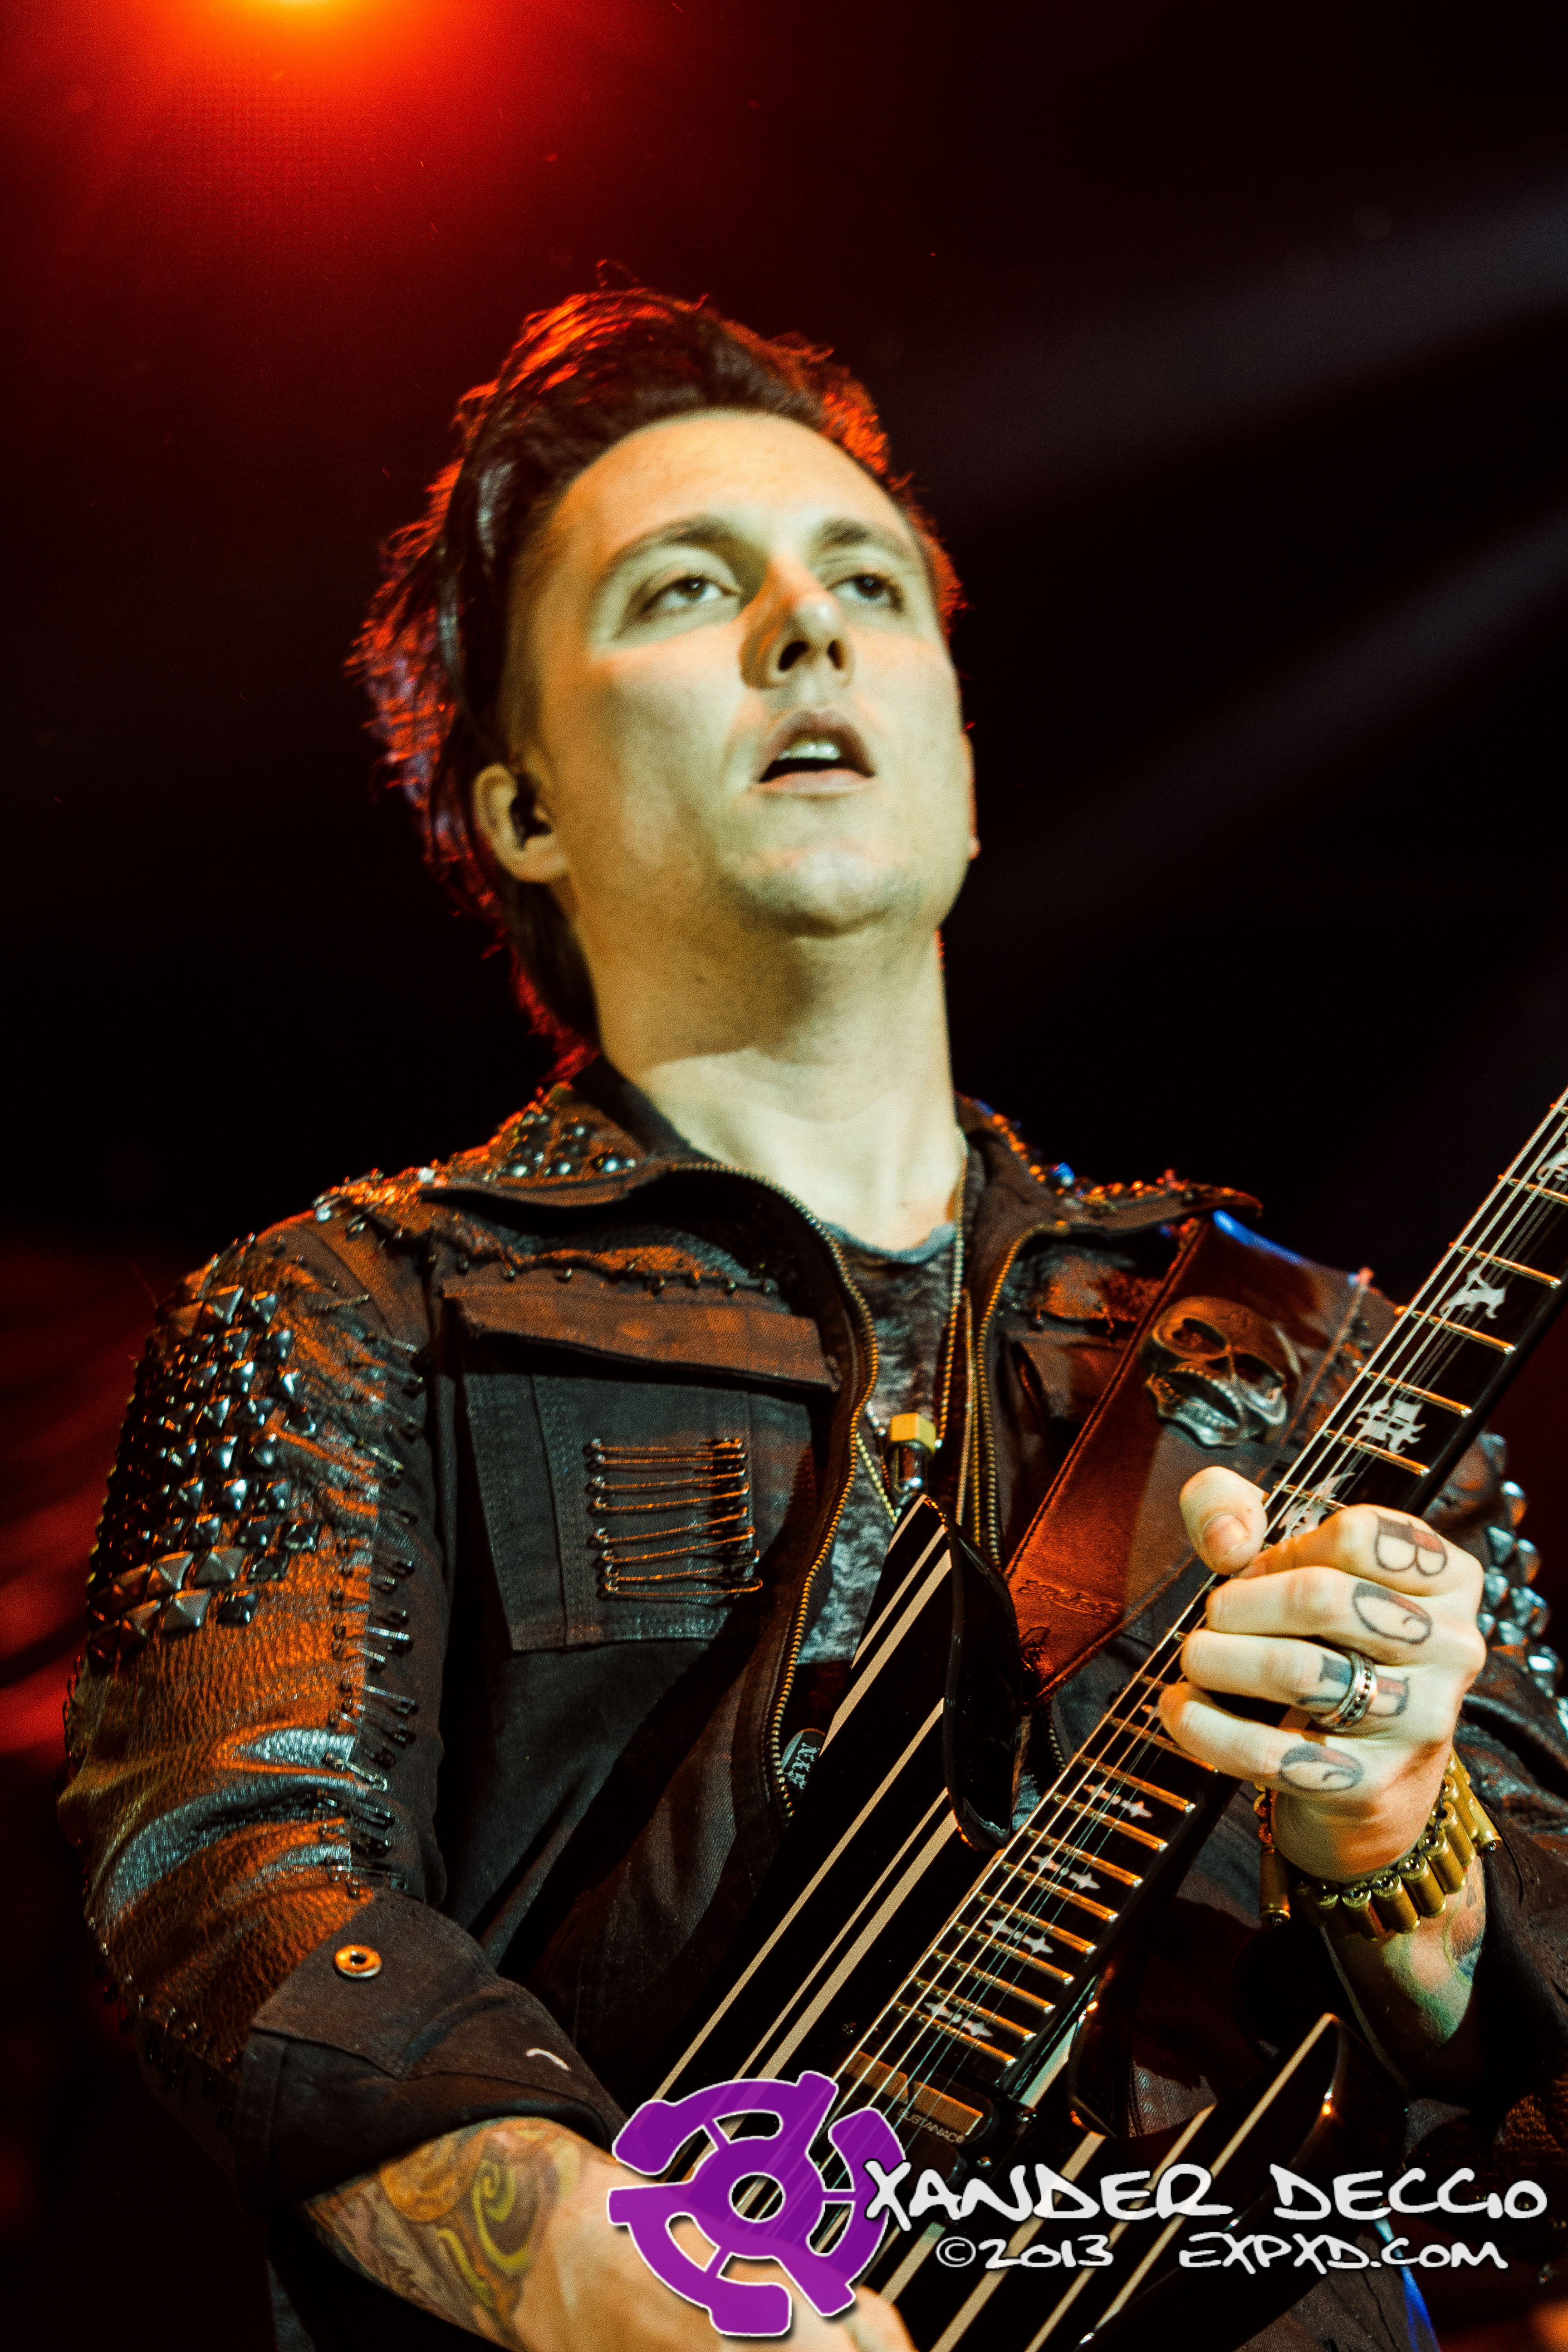 KISW Pain In The Grass 2013: Avenged Sevenfold (Photo by Xander Deccio)